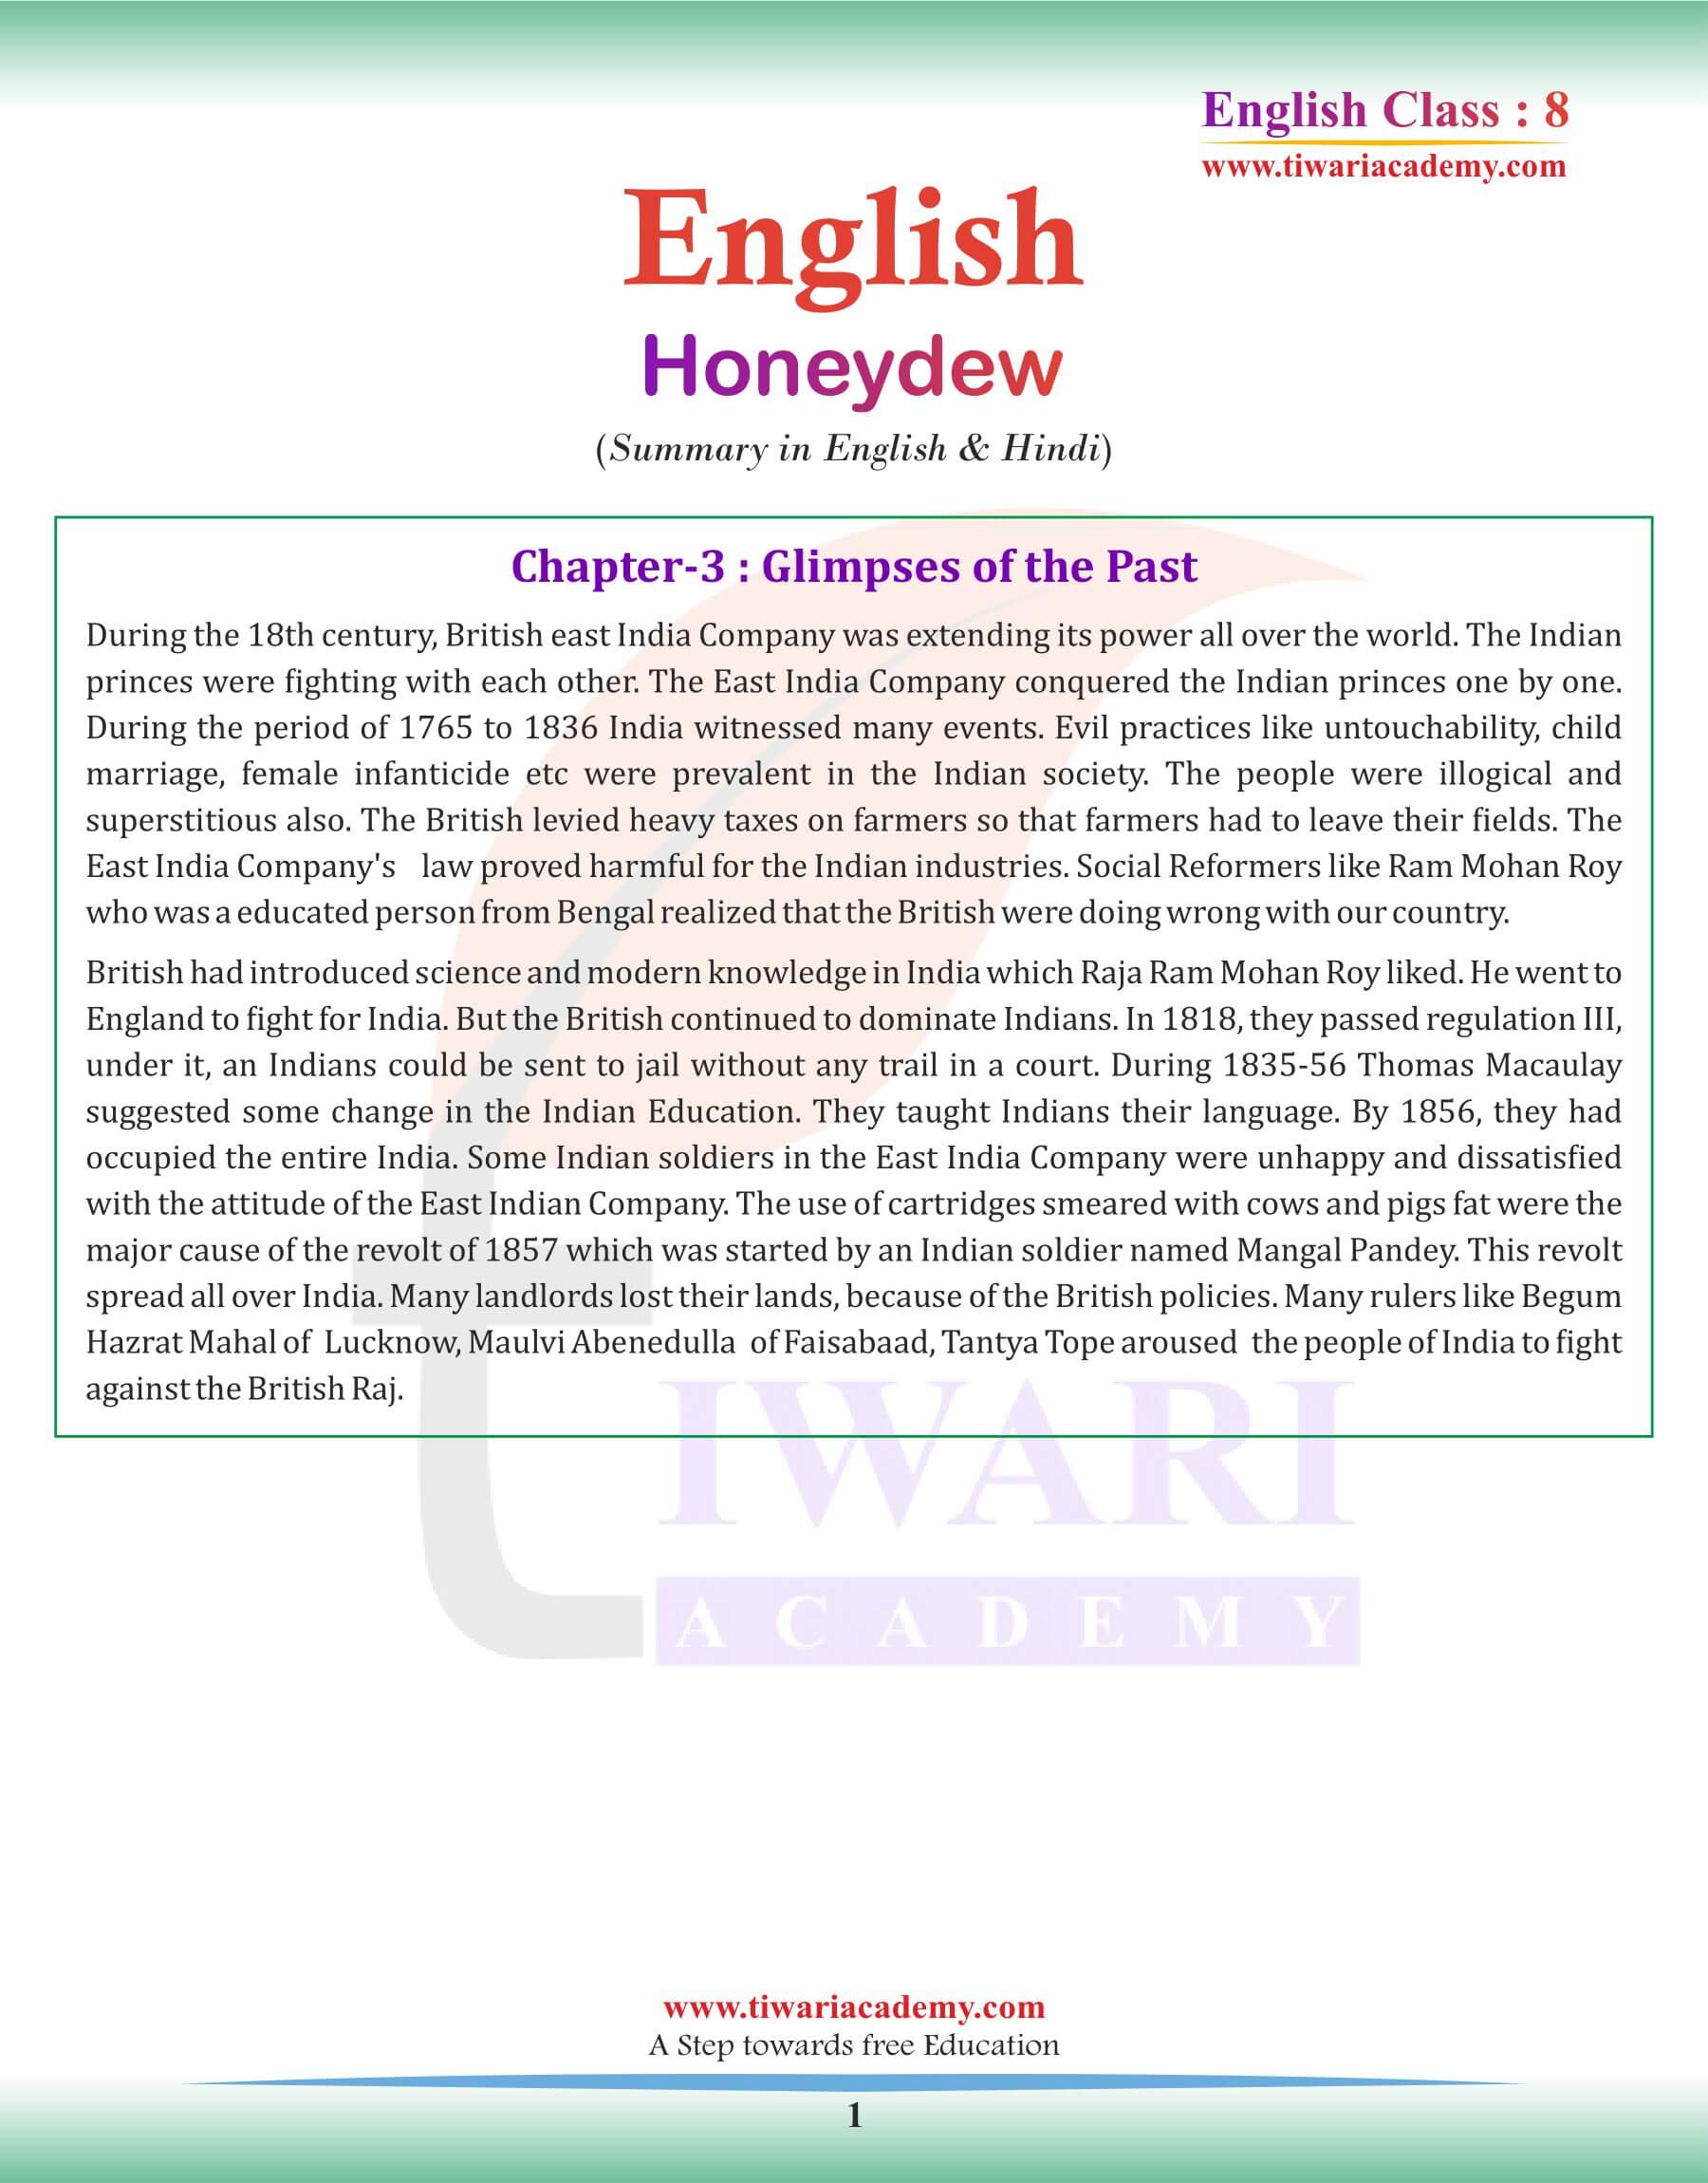 Class 8 English Chapter 3 Summary in English